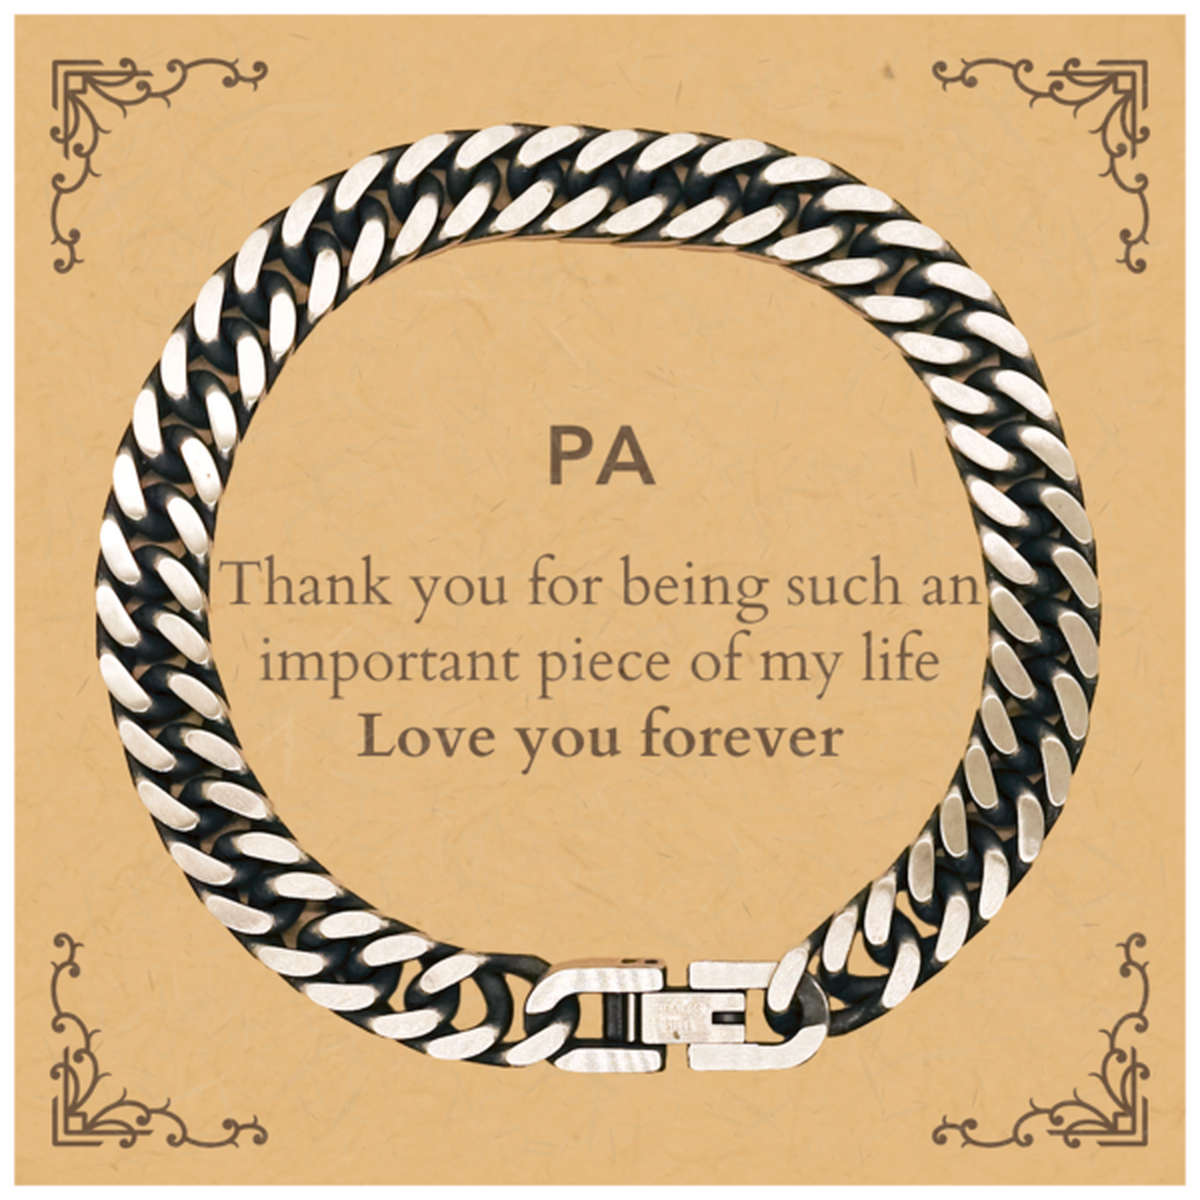 Appropriate Pa Cuban Link Chain Bracelet Epic Birthday Gifts for Pa Thank you for being such an important piece of my life Pa Christmas Mothers Fathers Day